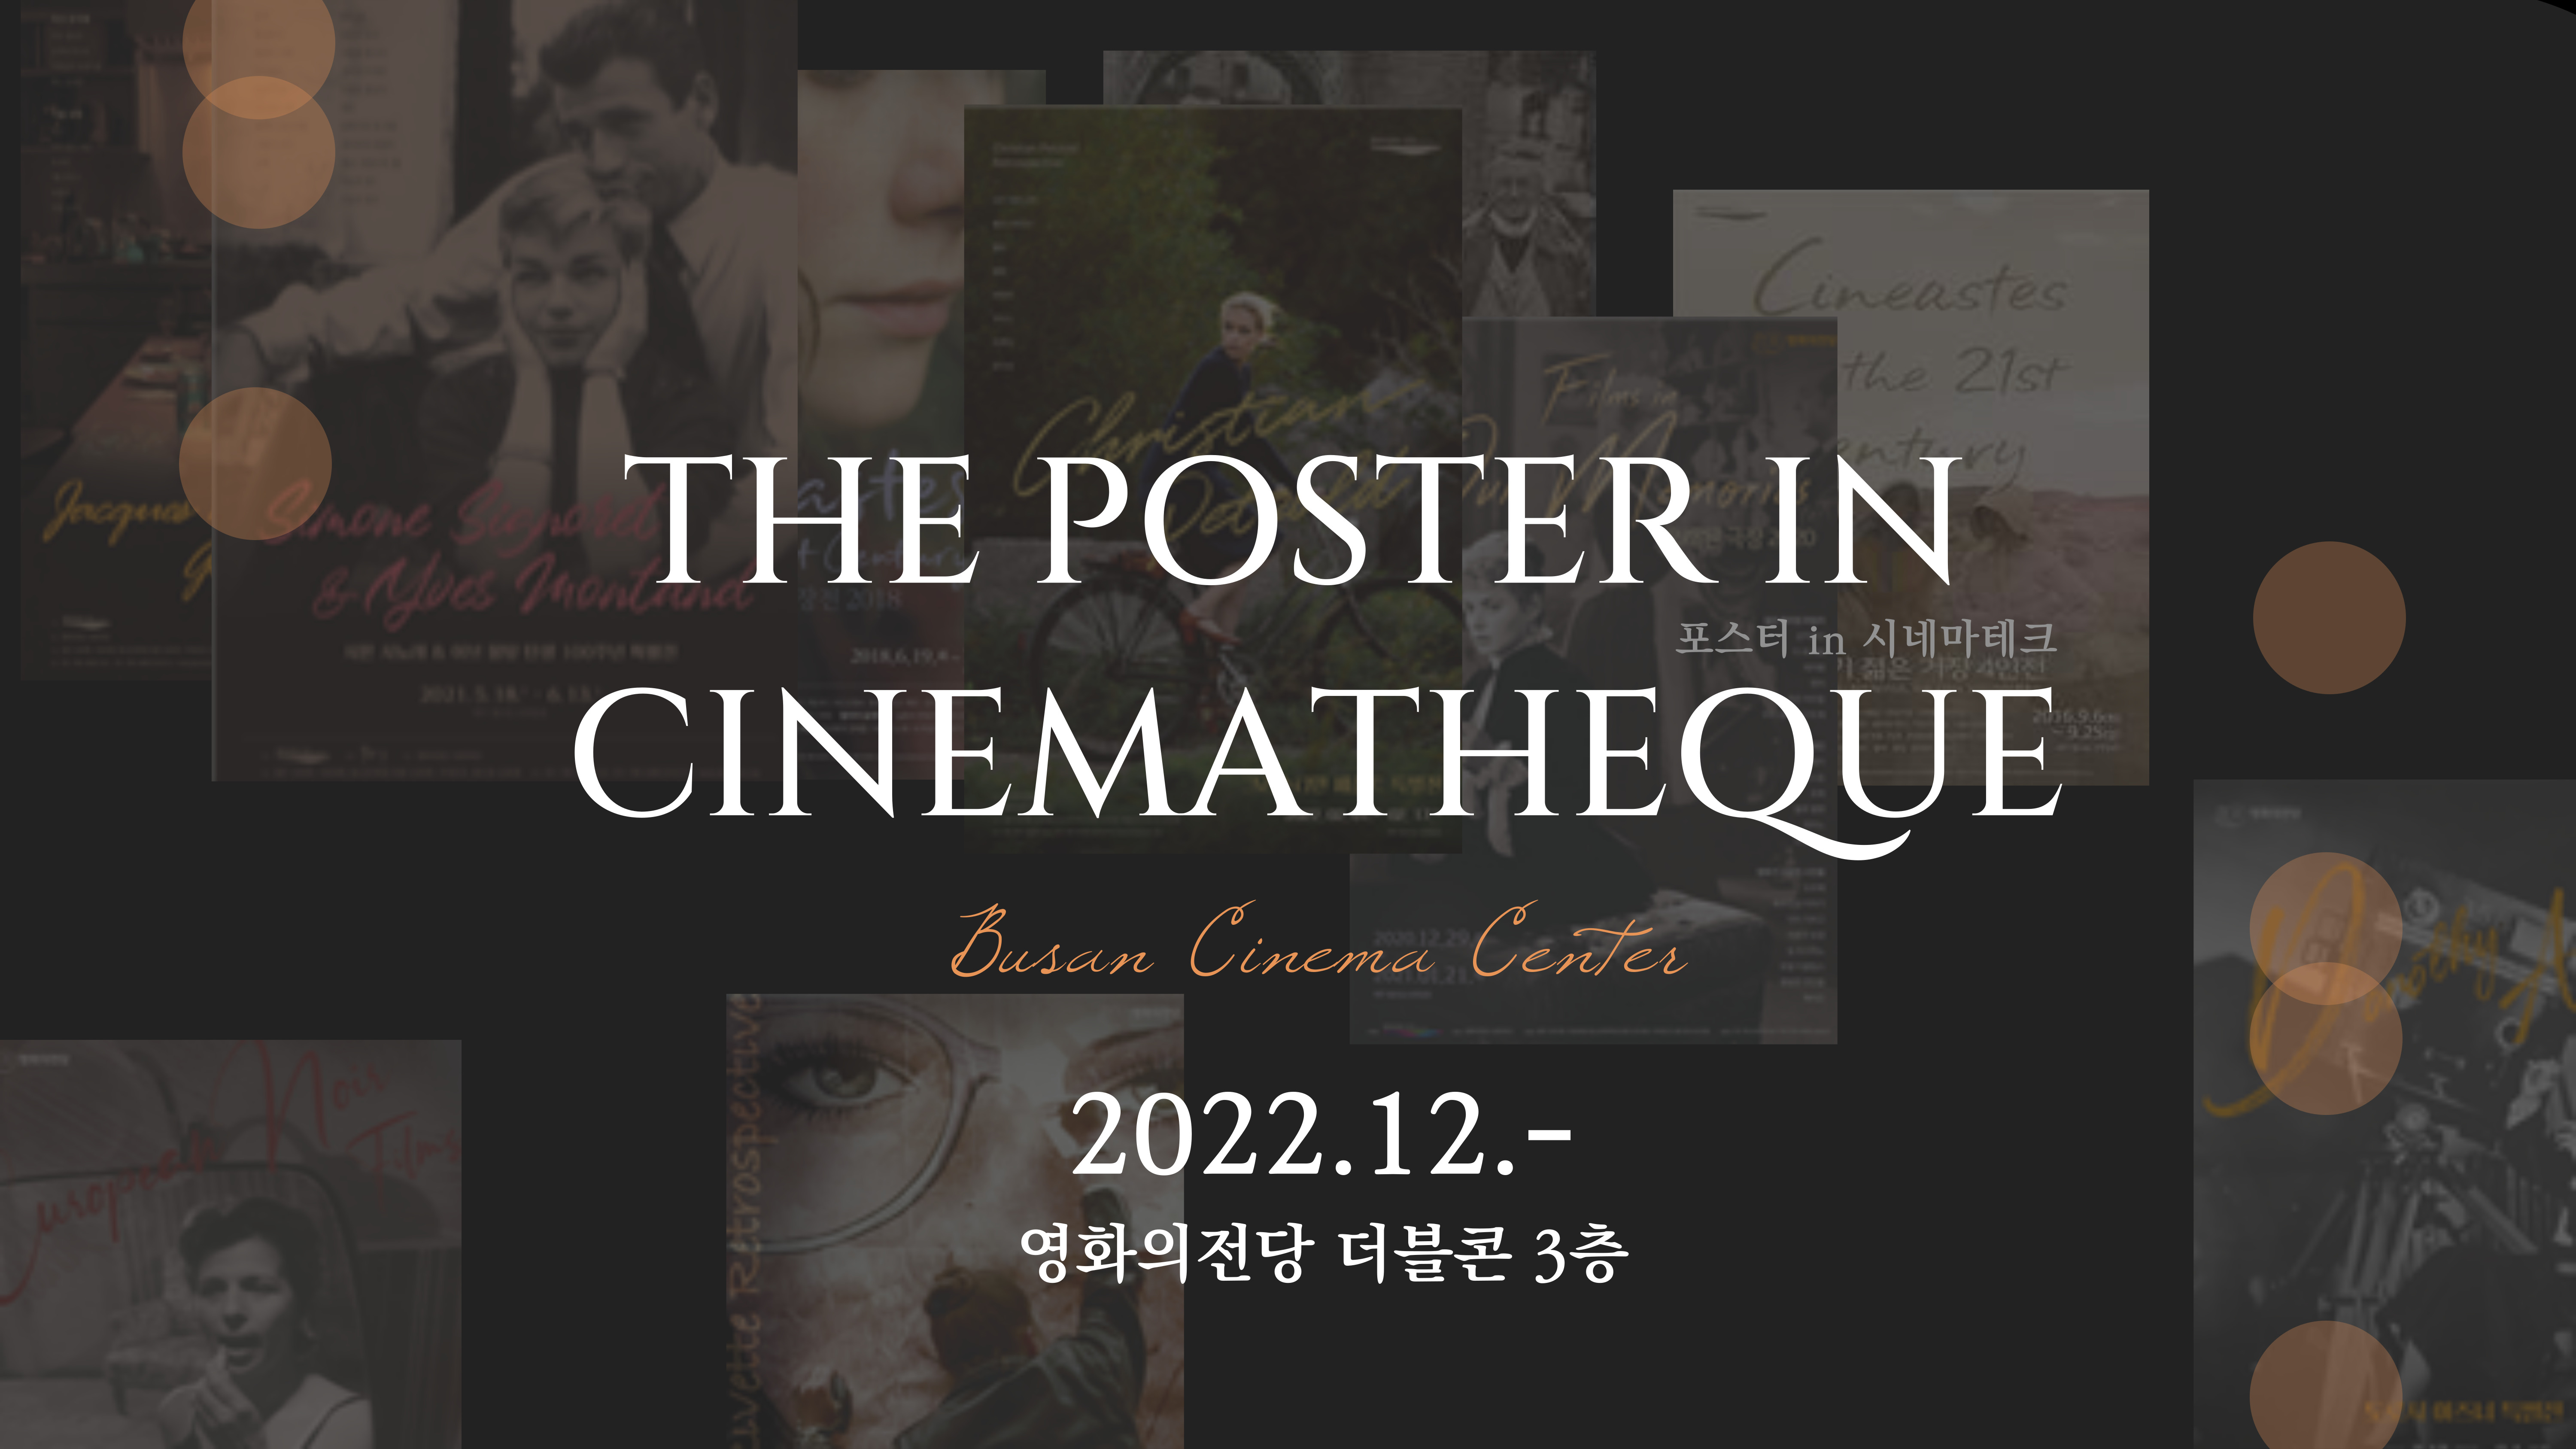 THE POSTER IN CINEMATEQUE 포스터 in 시네마테크 Busan Cinema Center 2022.12.- 영화의전당 더블콘 3층